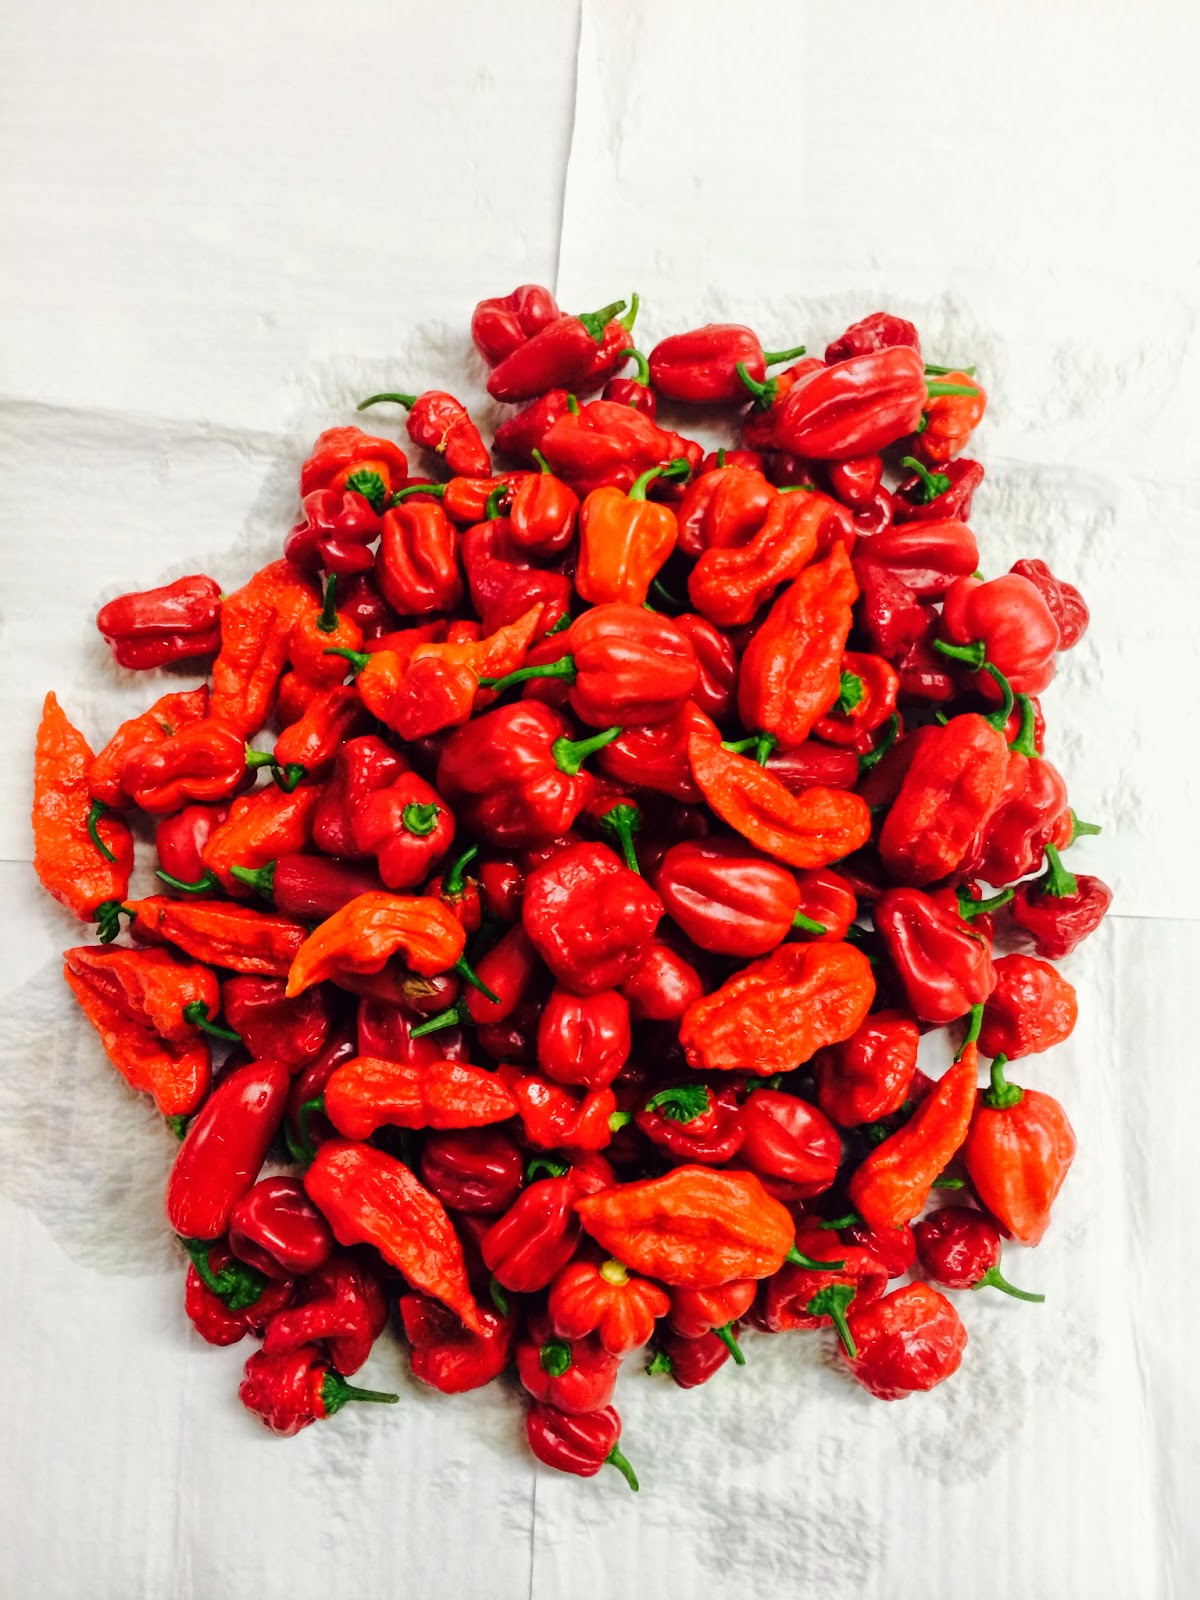 Hydroponic Pioneer Worlds Hottest Peppers, OMG